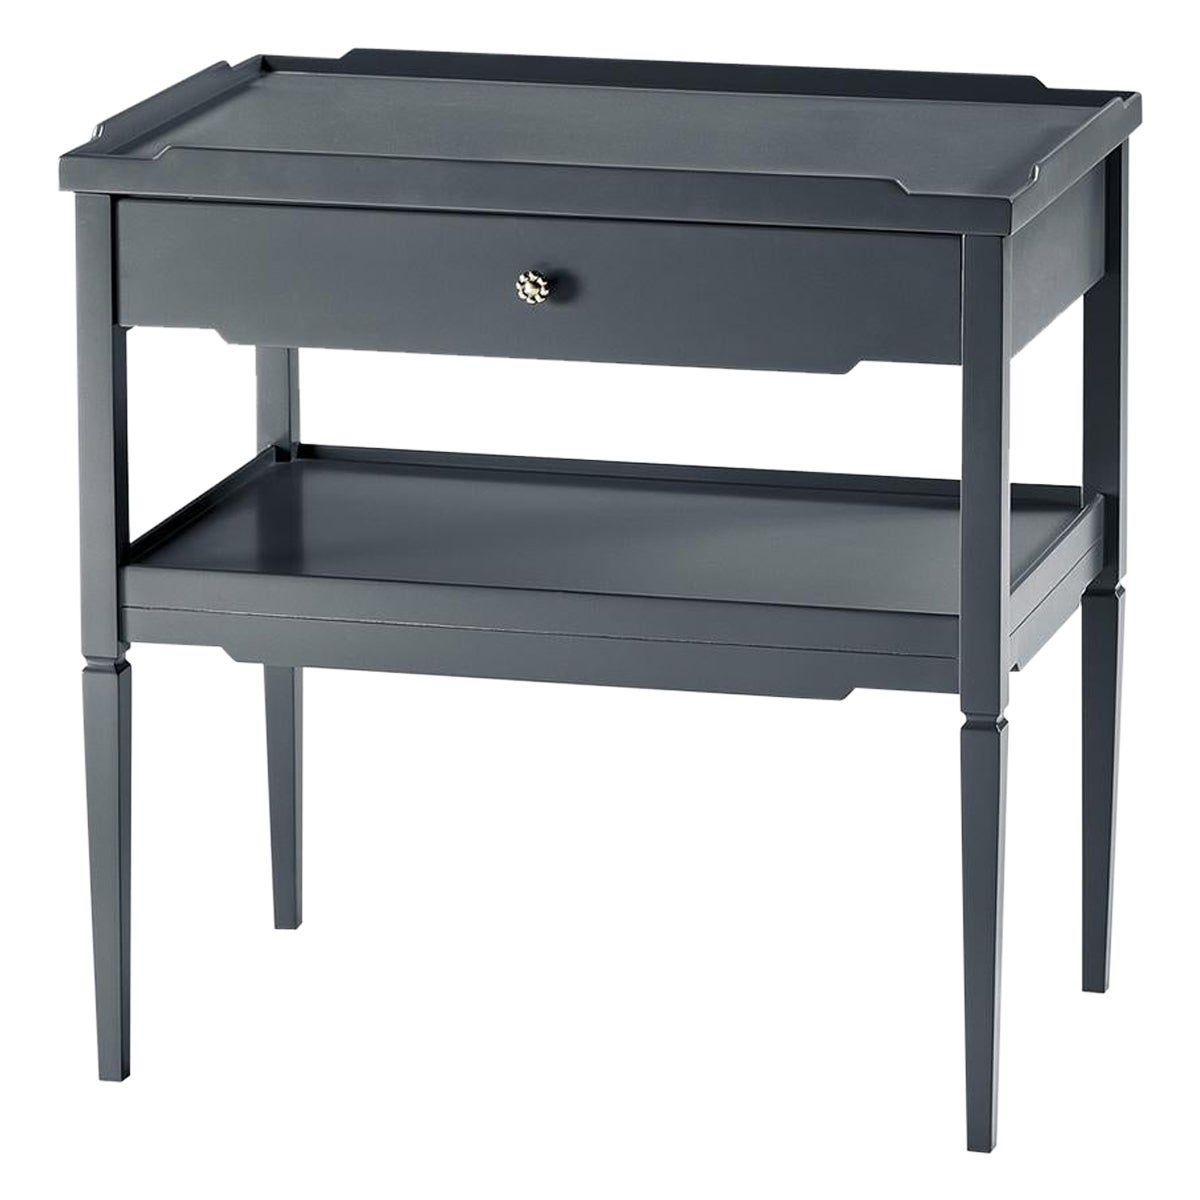 Modern Painted Side Table, Navy